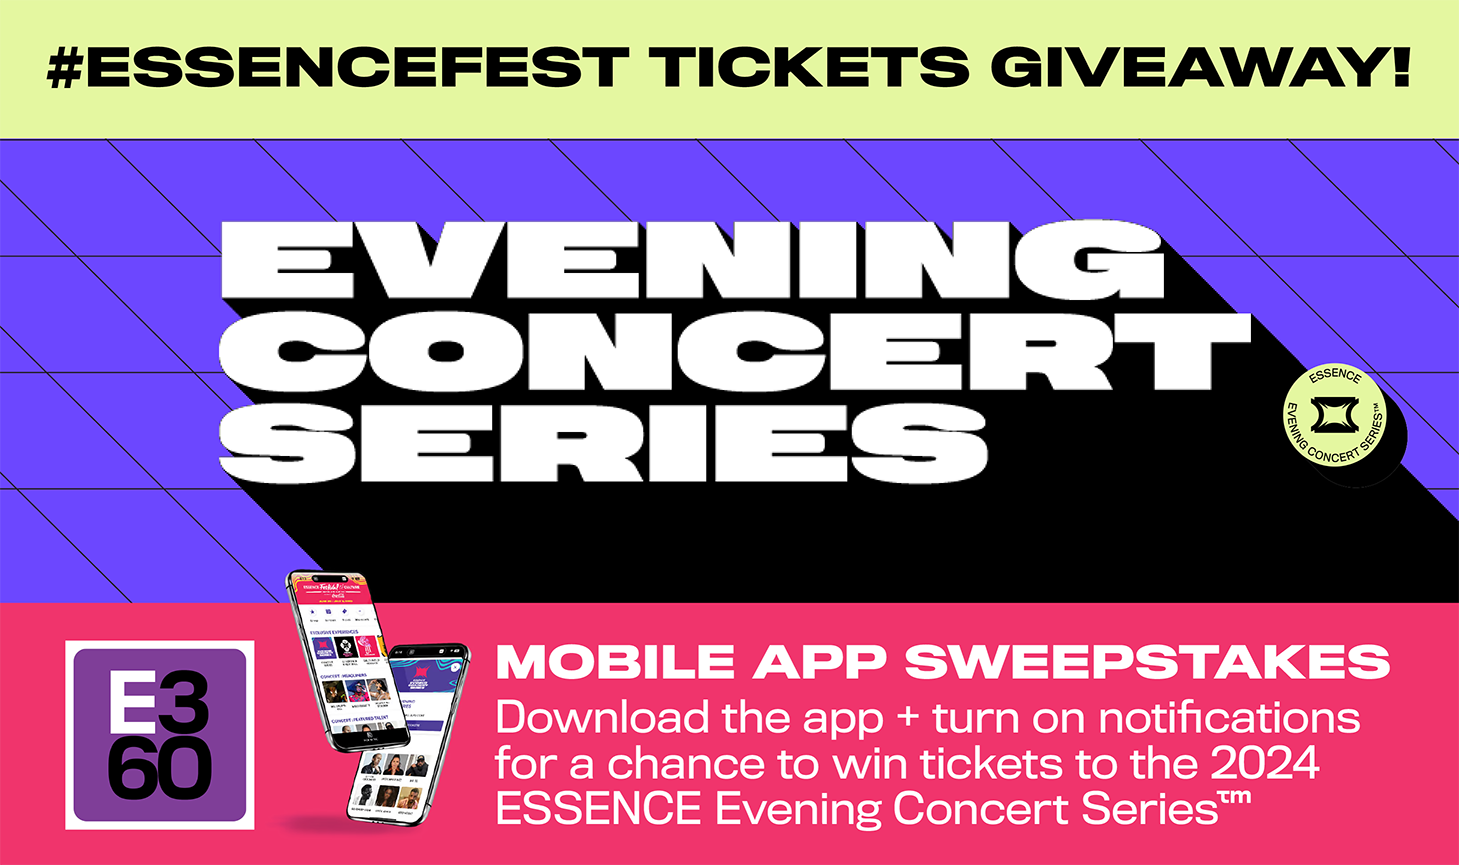 Excitement Builds For The 2024 Essence Festival of Culture With E360 App Sweepstakes